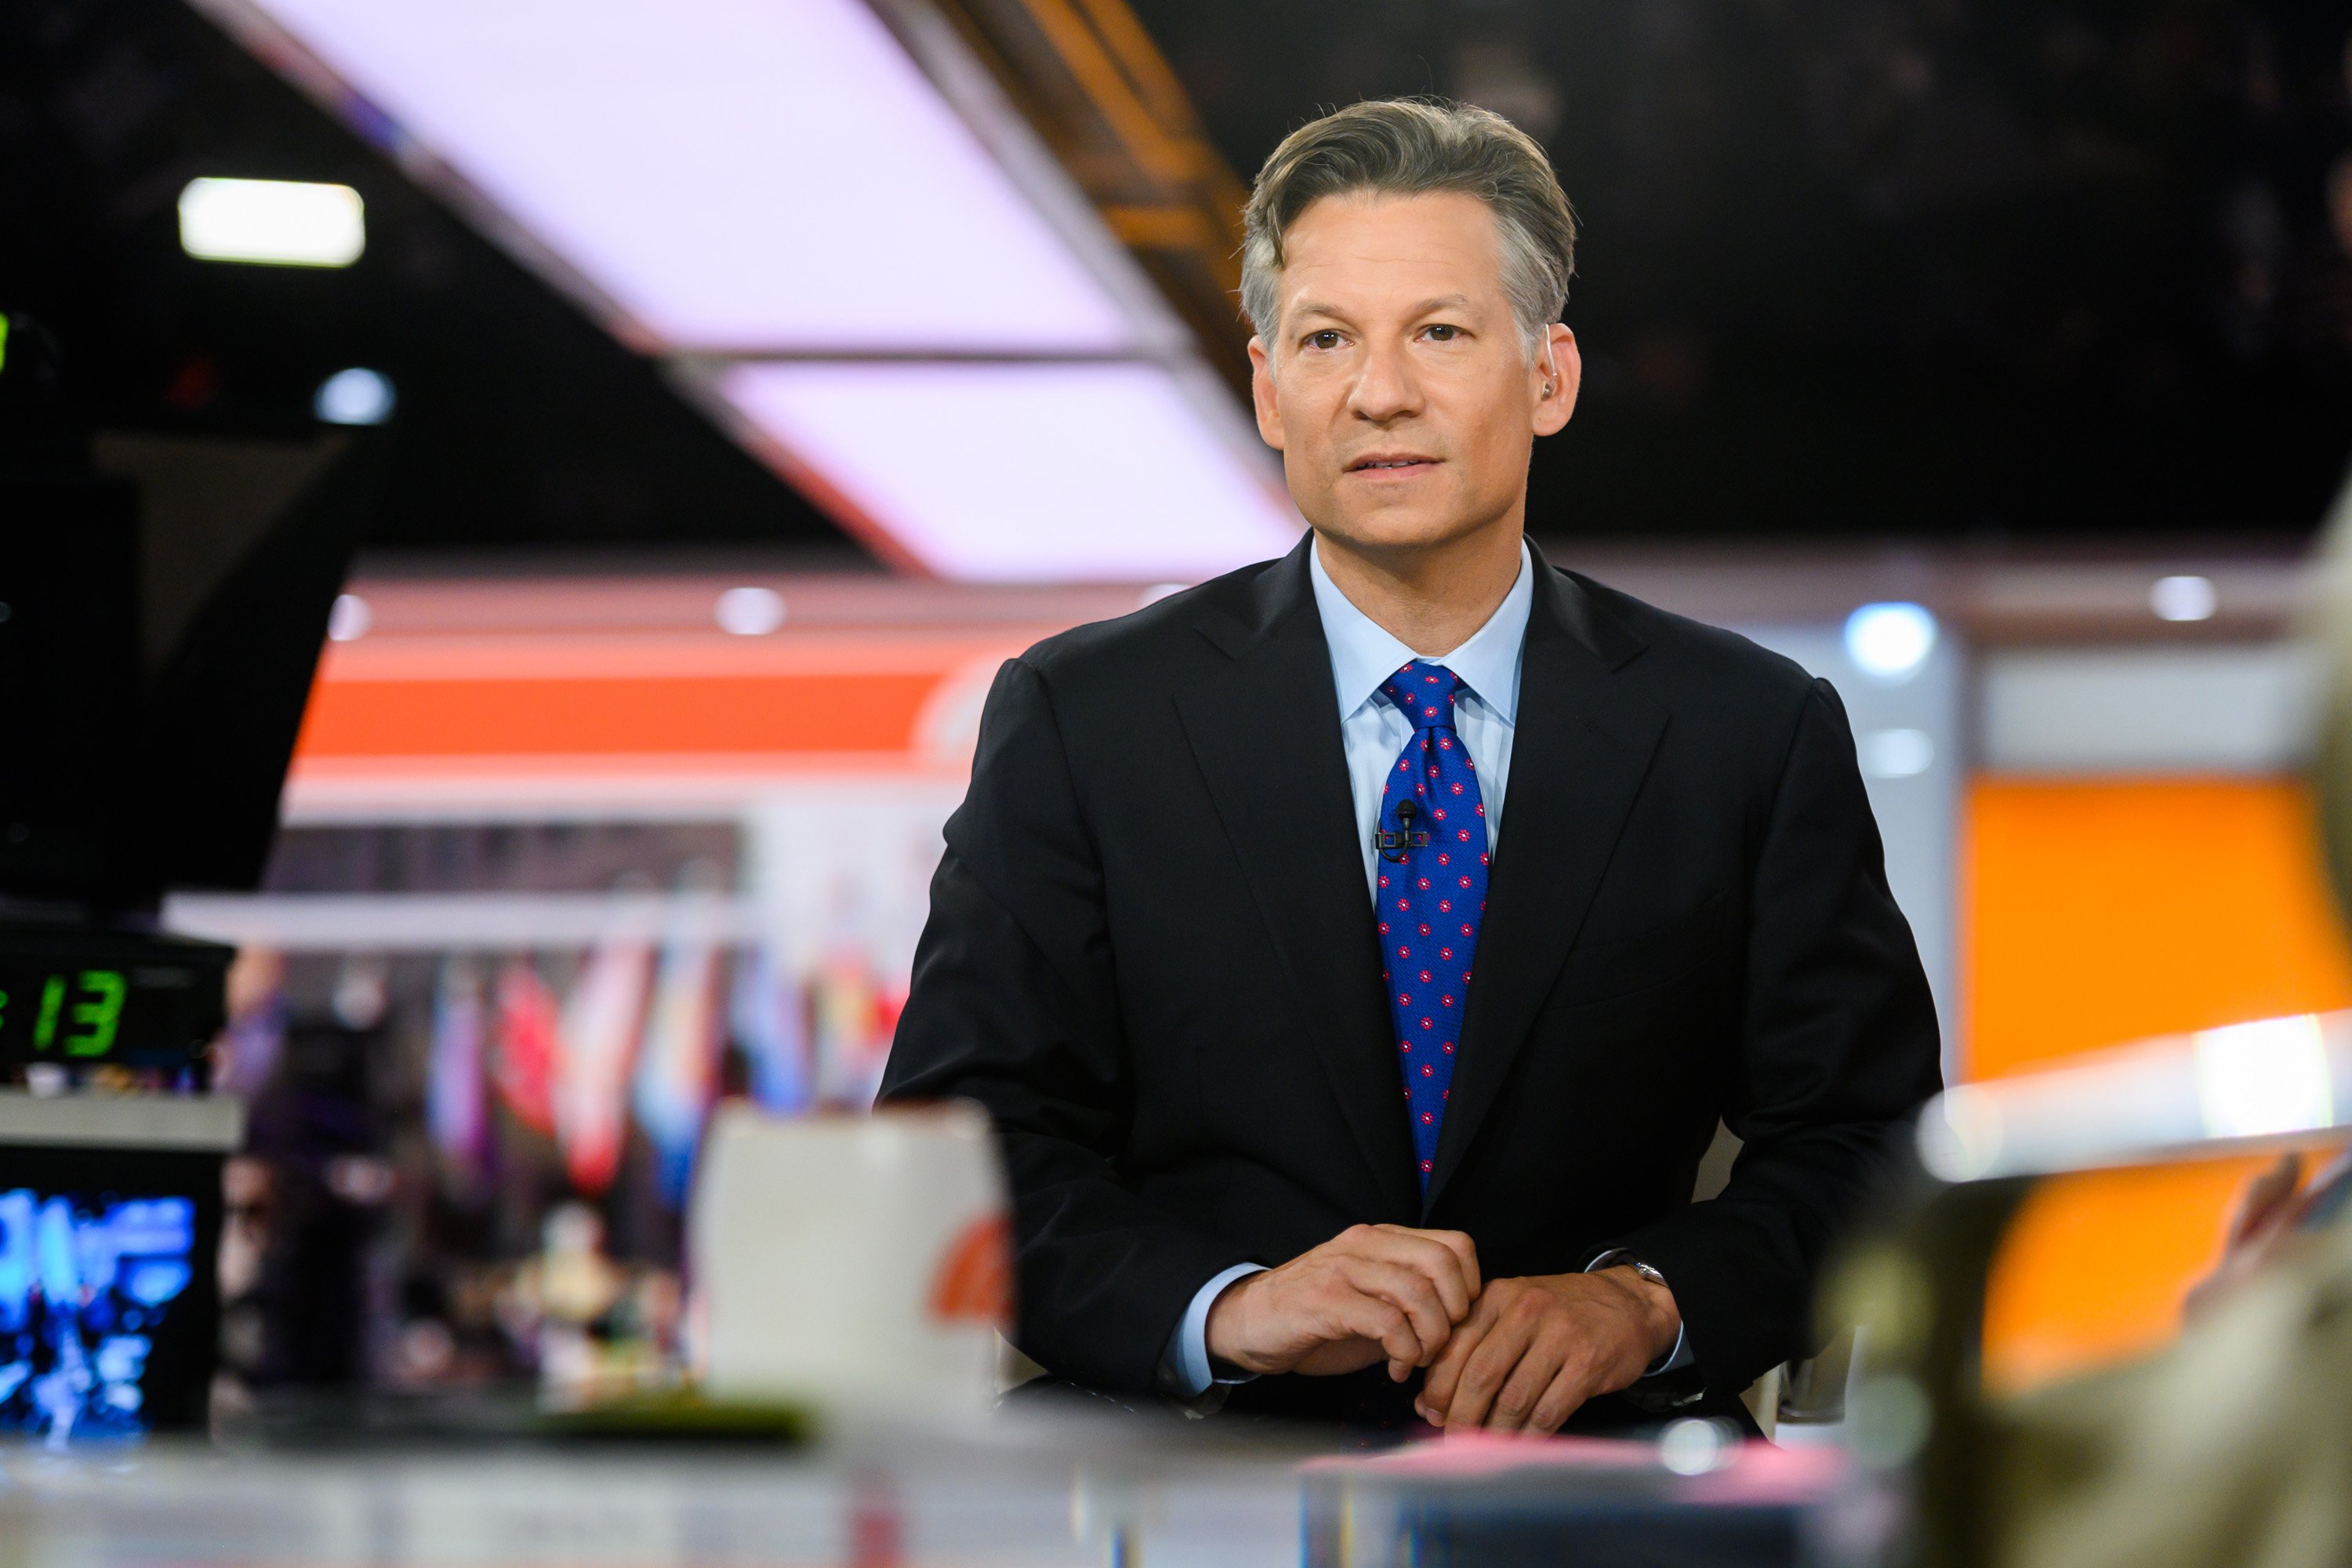 Richard Engel on July 12, 2019 in "Today" | Source: Getty Images